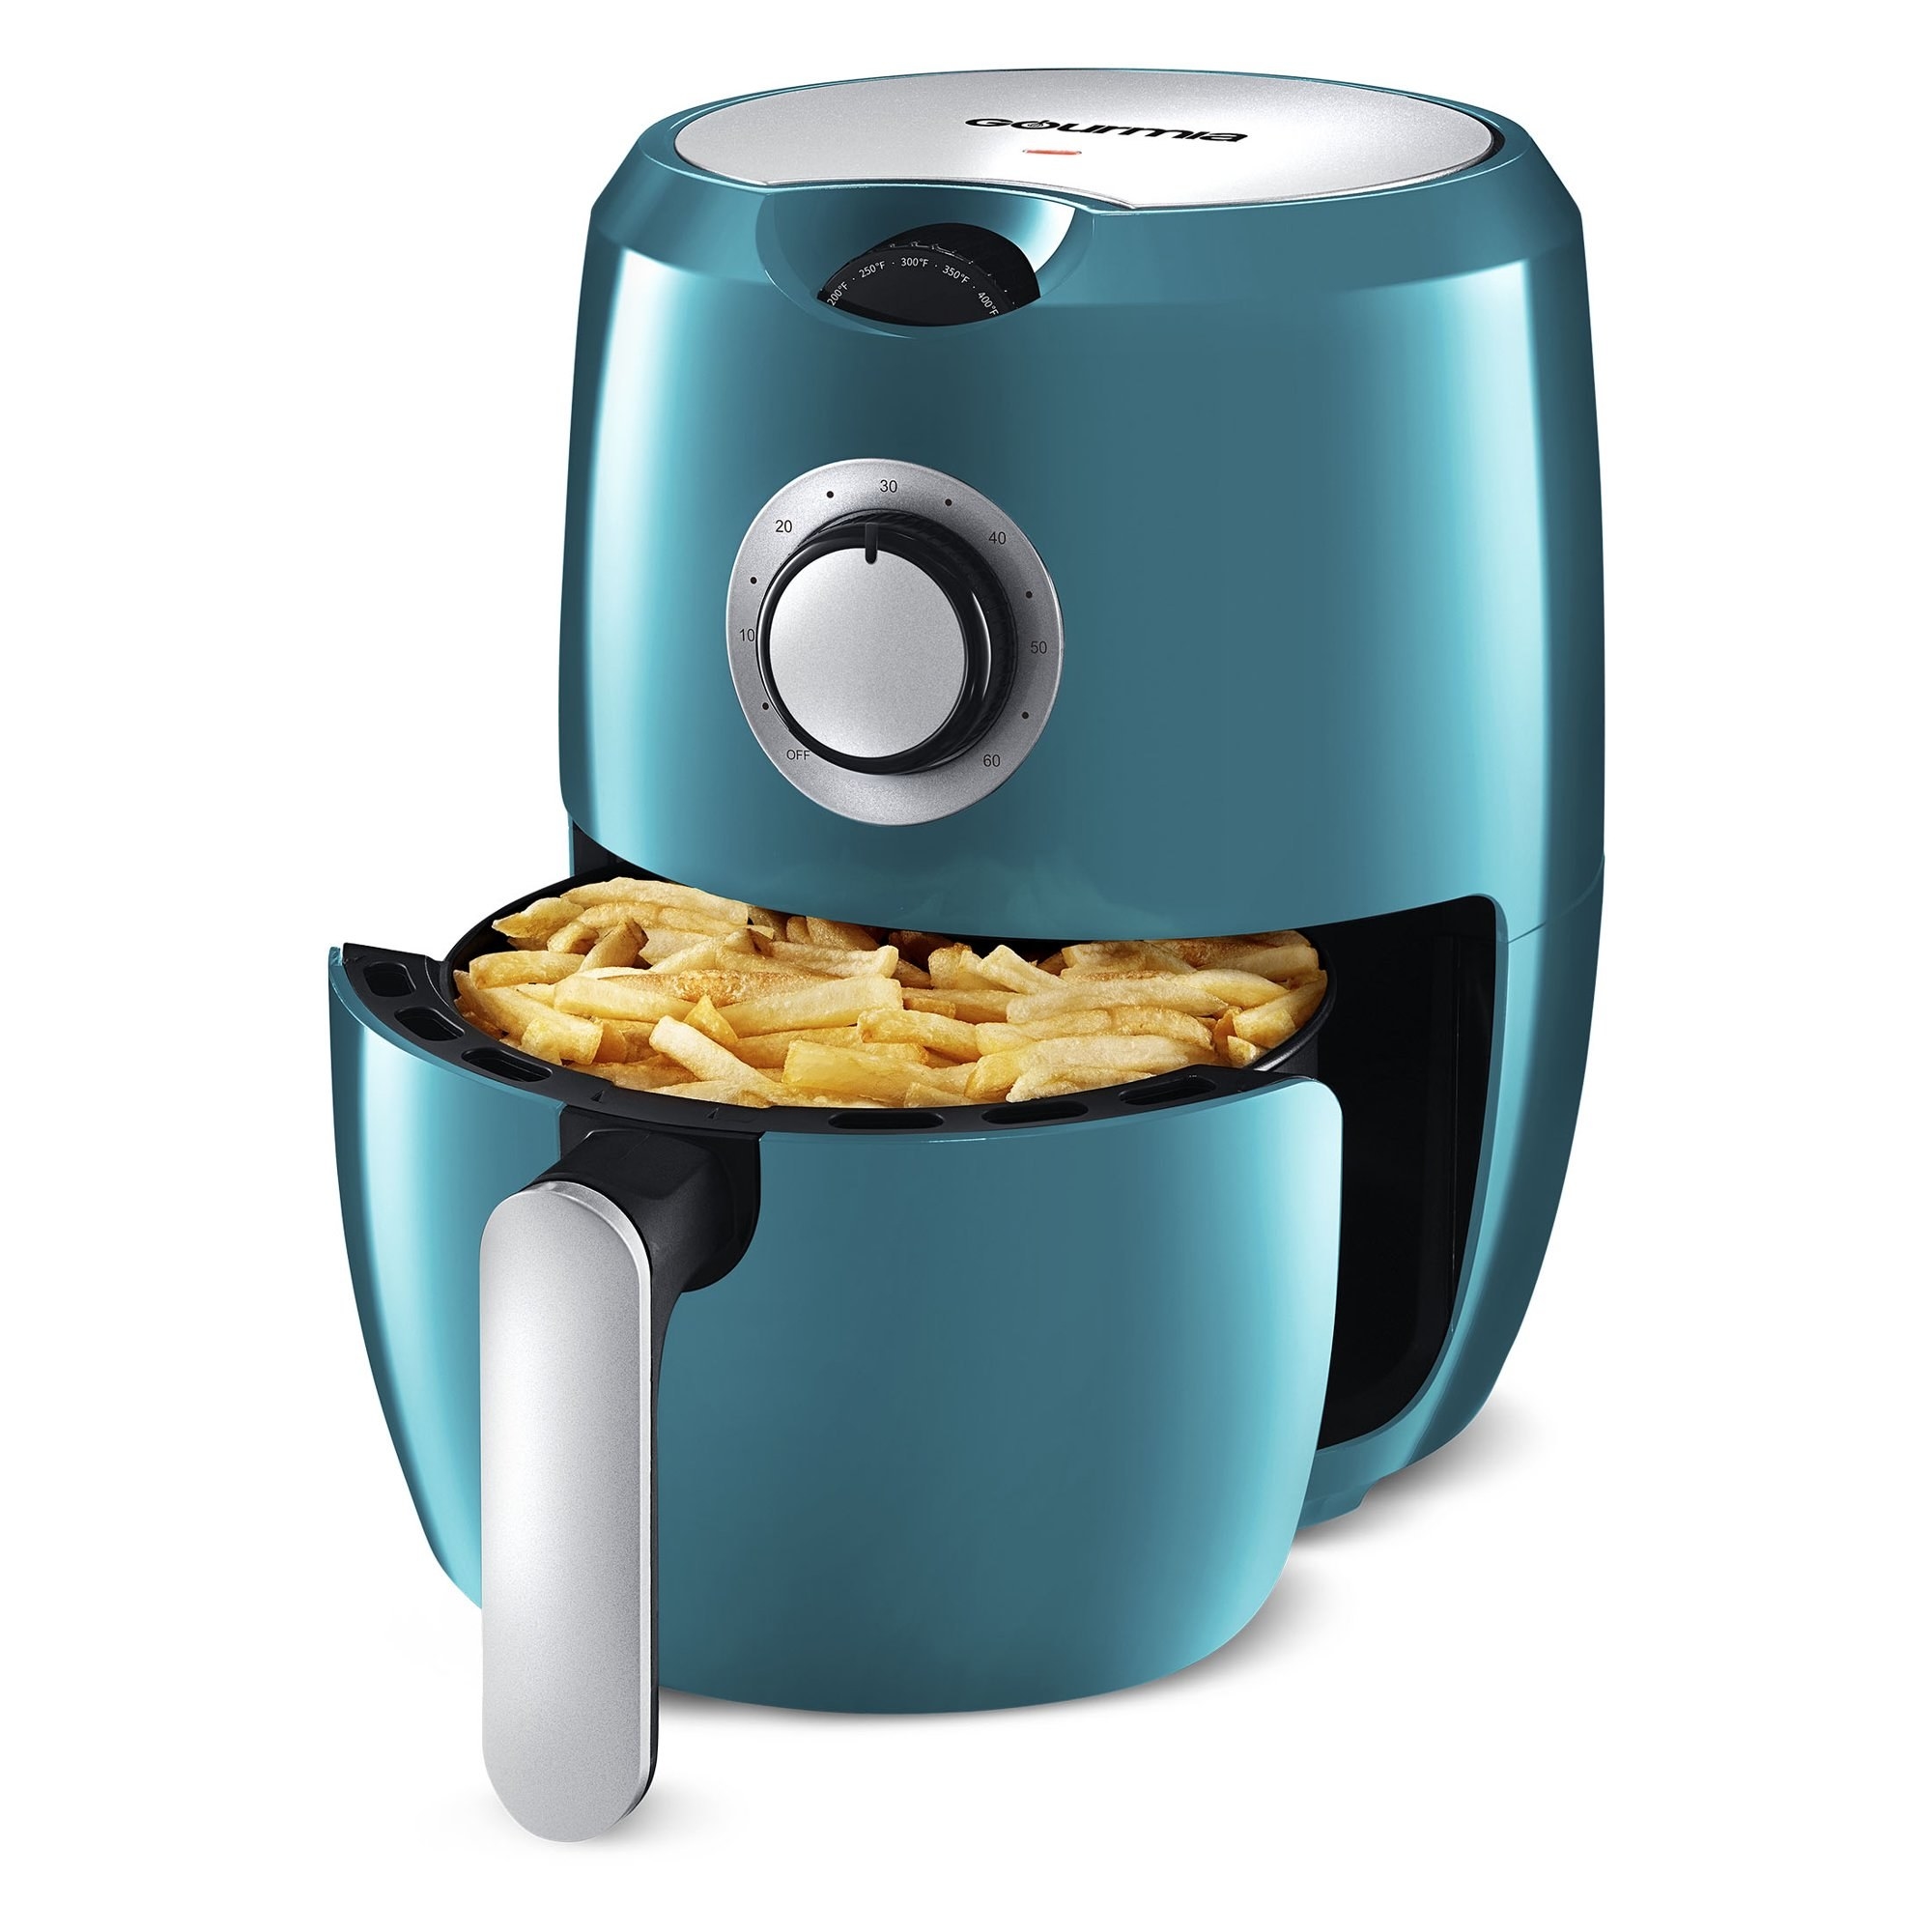 A metallic-y blue-green air fryer with the basket portion of the machine pulled out and containing french fries